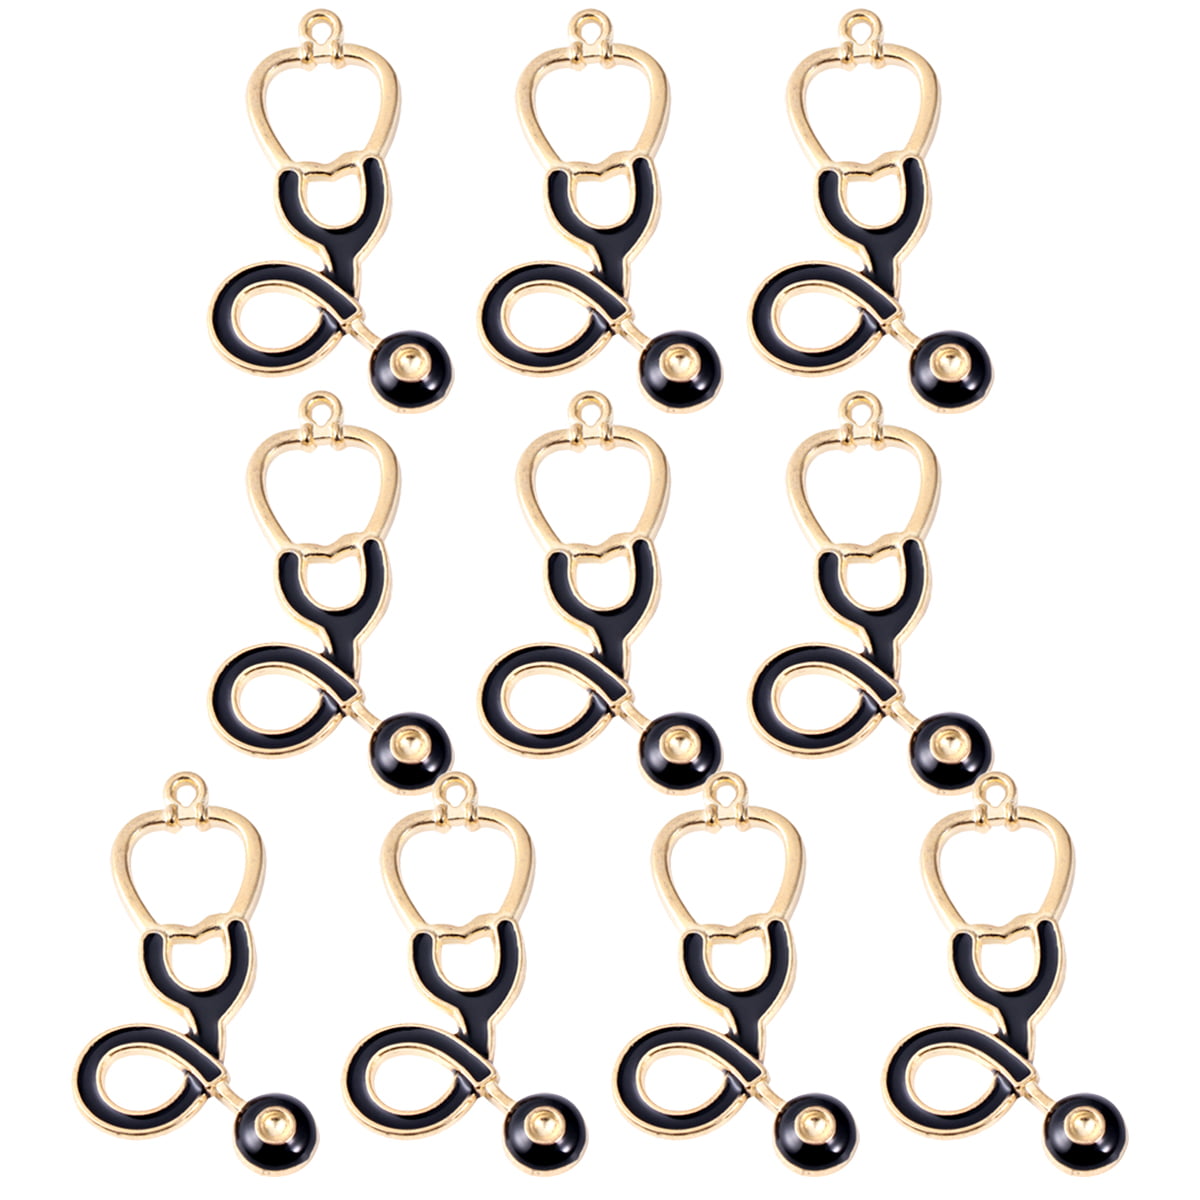 10 Pcs Medical Alert ID Charms Pendant for DIY Jewelry Making Necklace Bracelet 